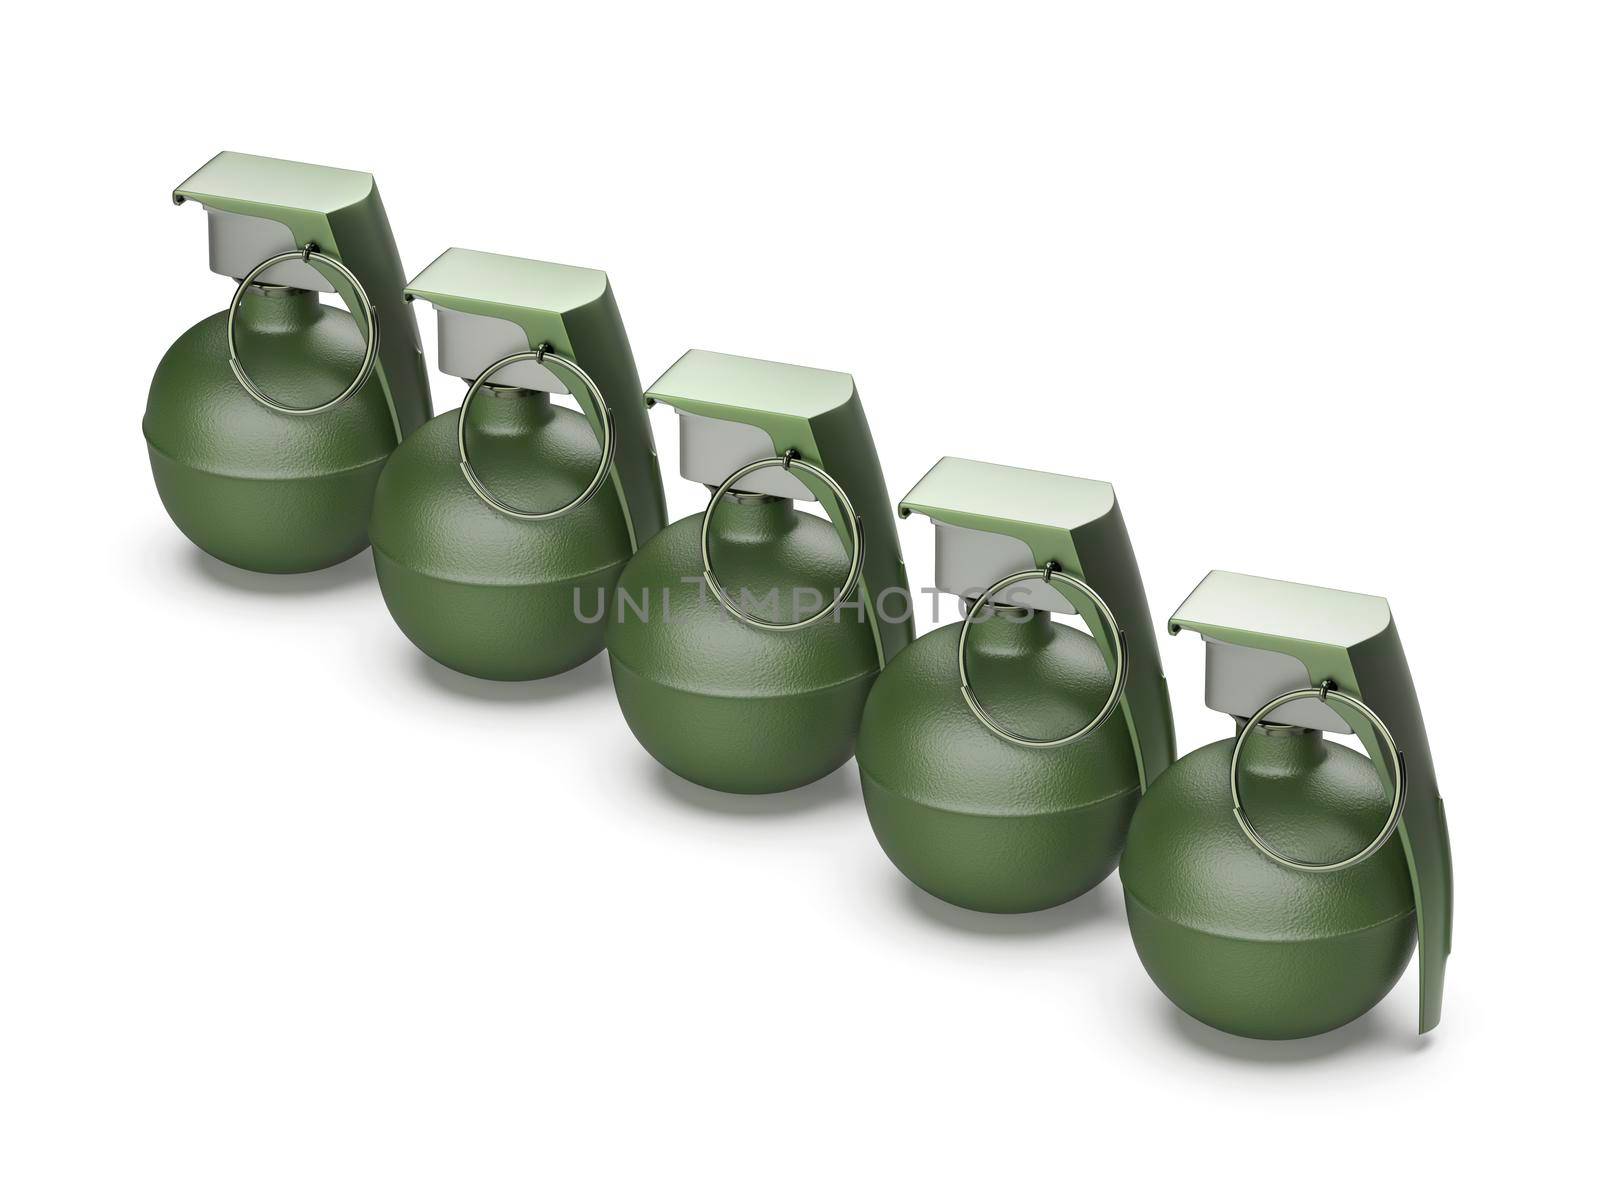 Five hand grenades by magraphics